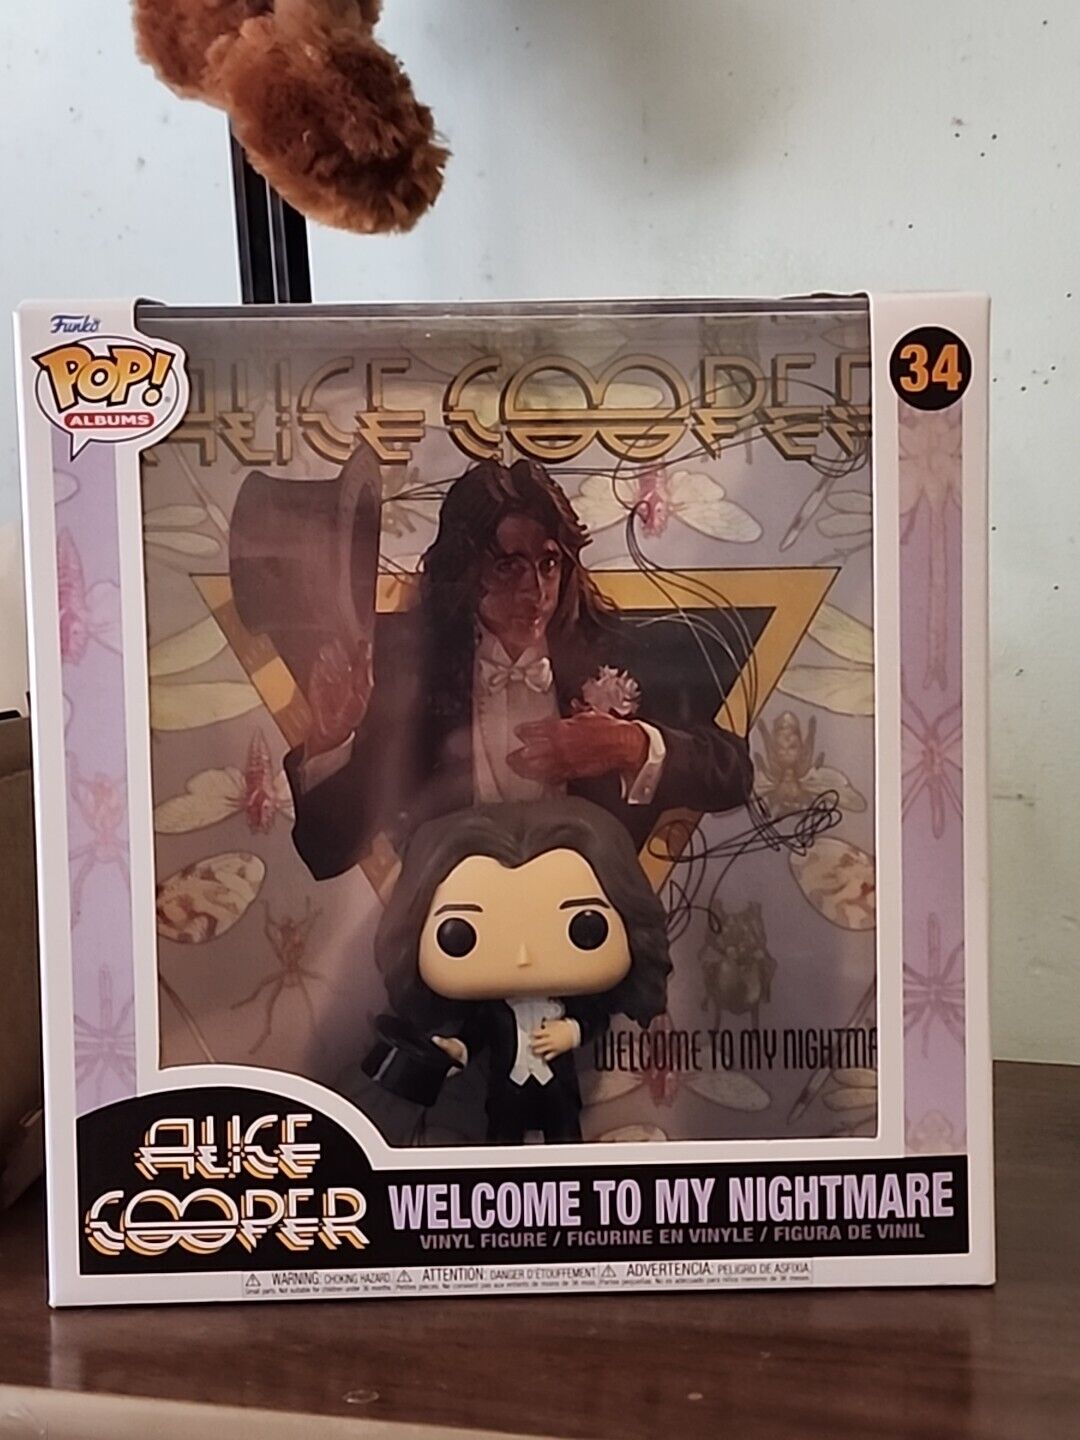 Funko Pop Album Cover with Case: Alice Cooper Welcome to My Nightmare #34